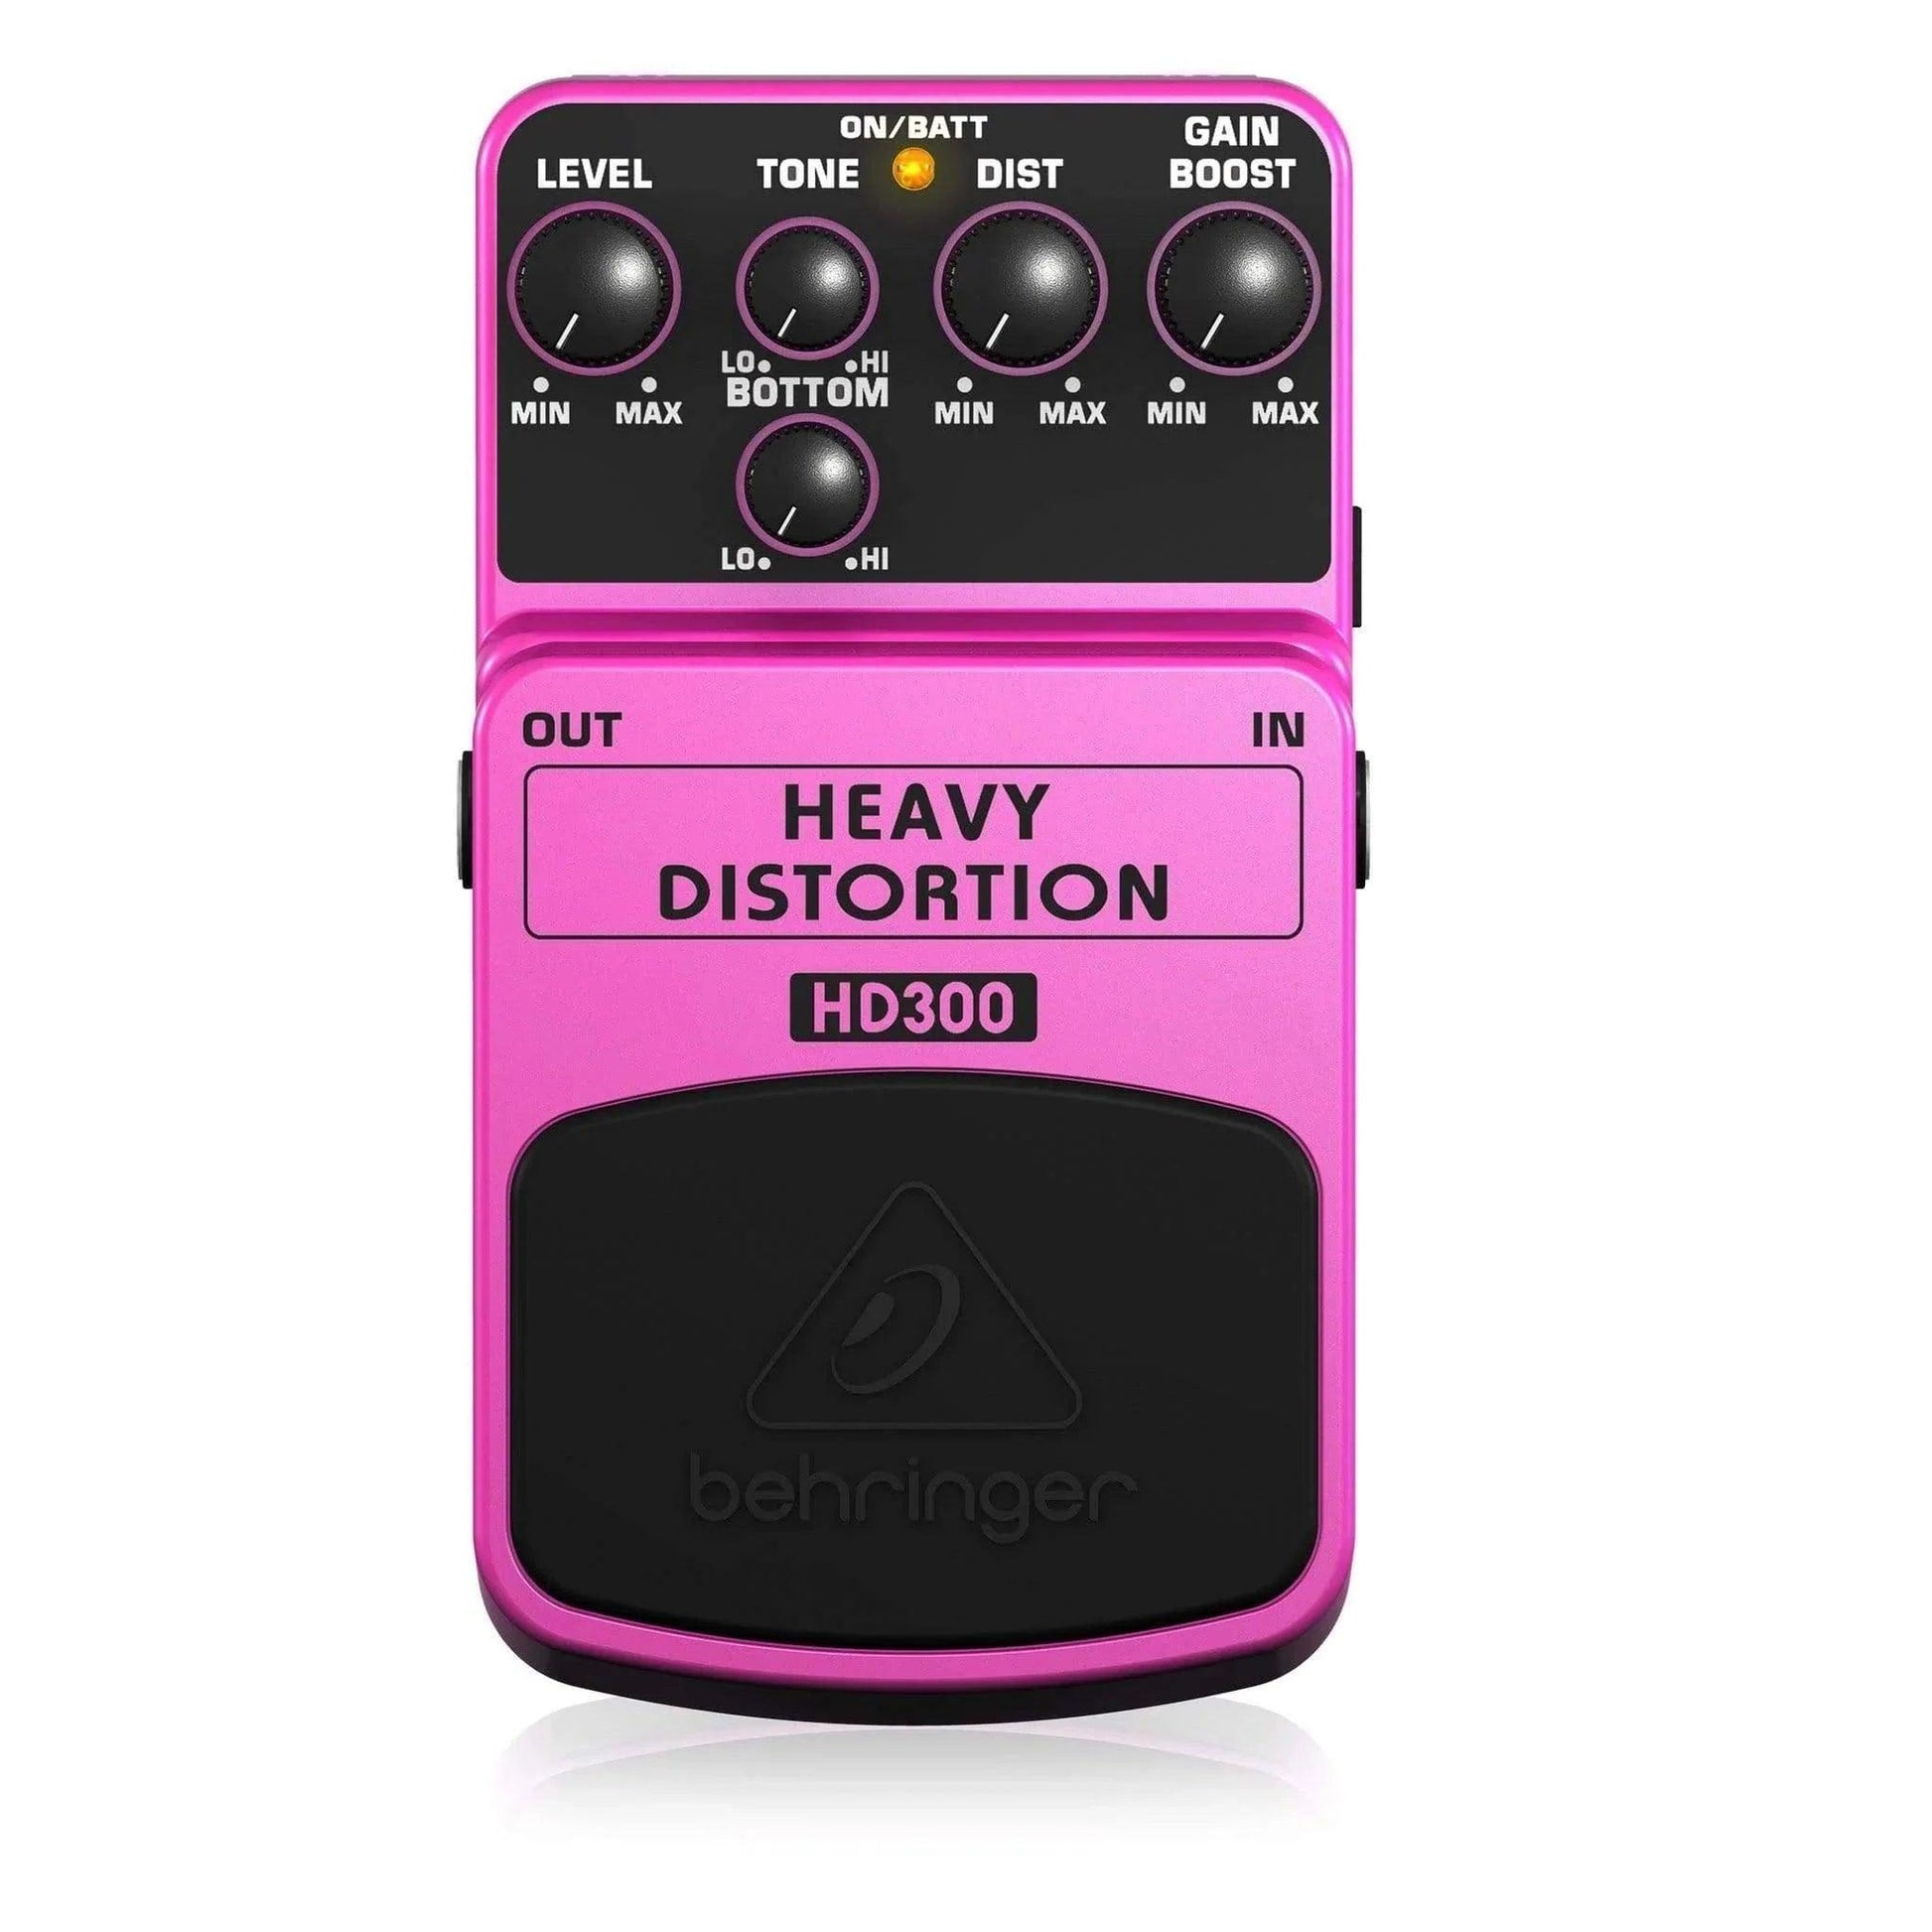 Behringer HD300 Heavy Distortion Guitar Effects Pedal